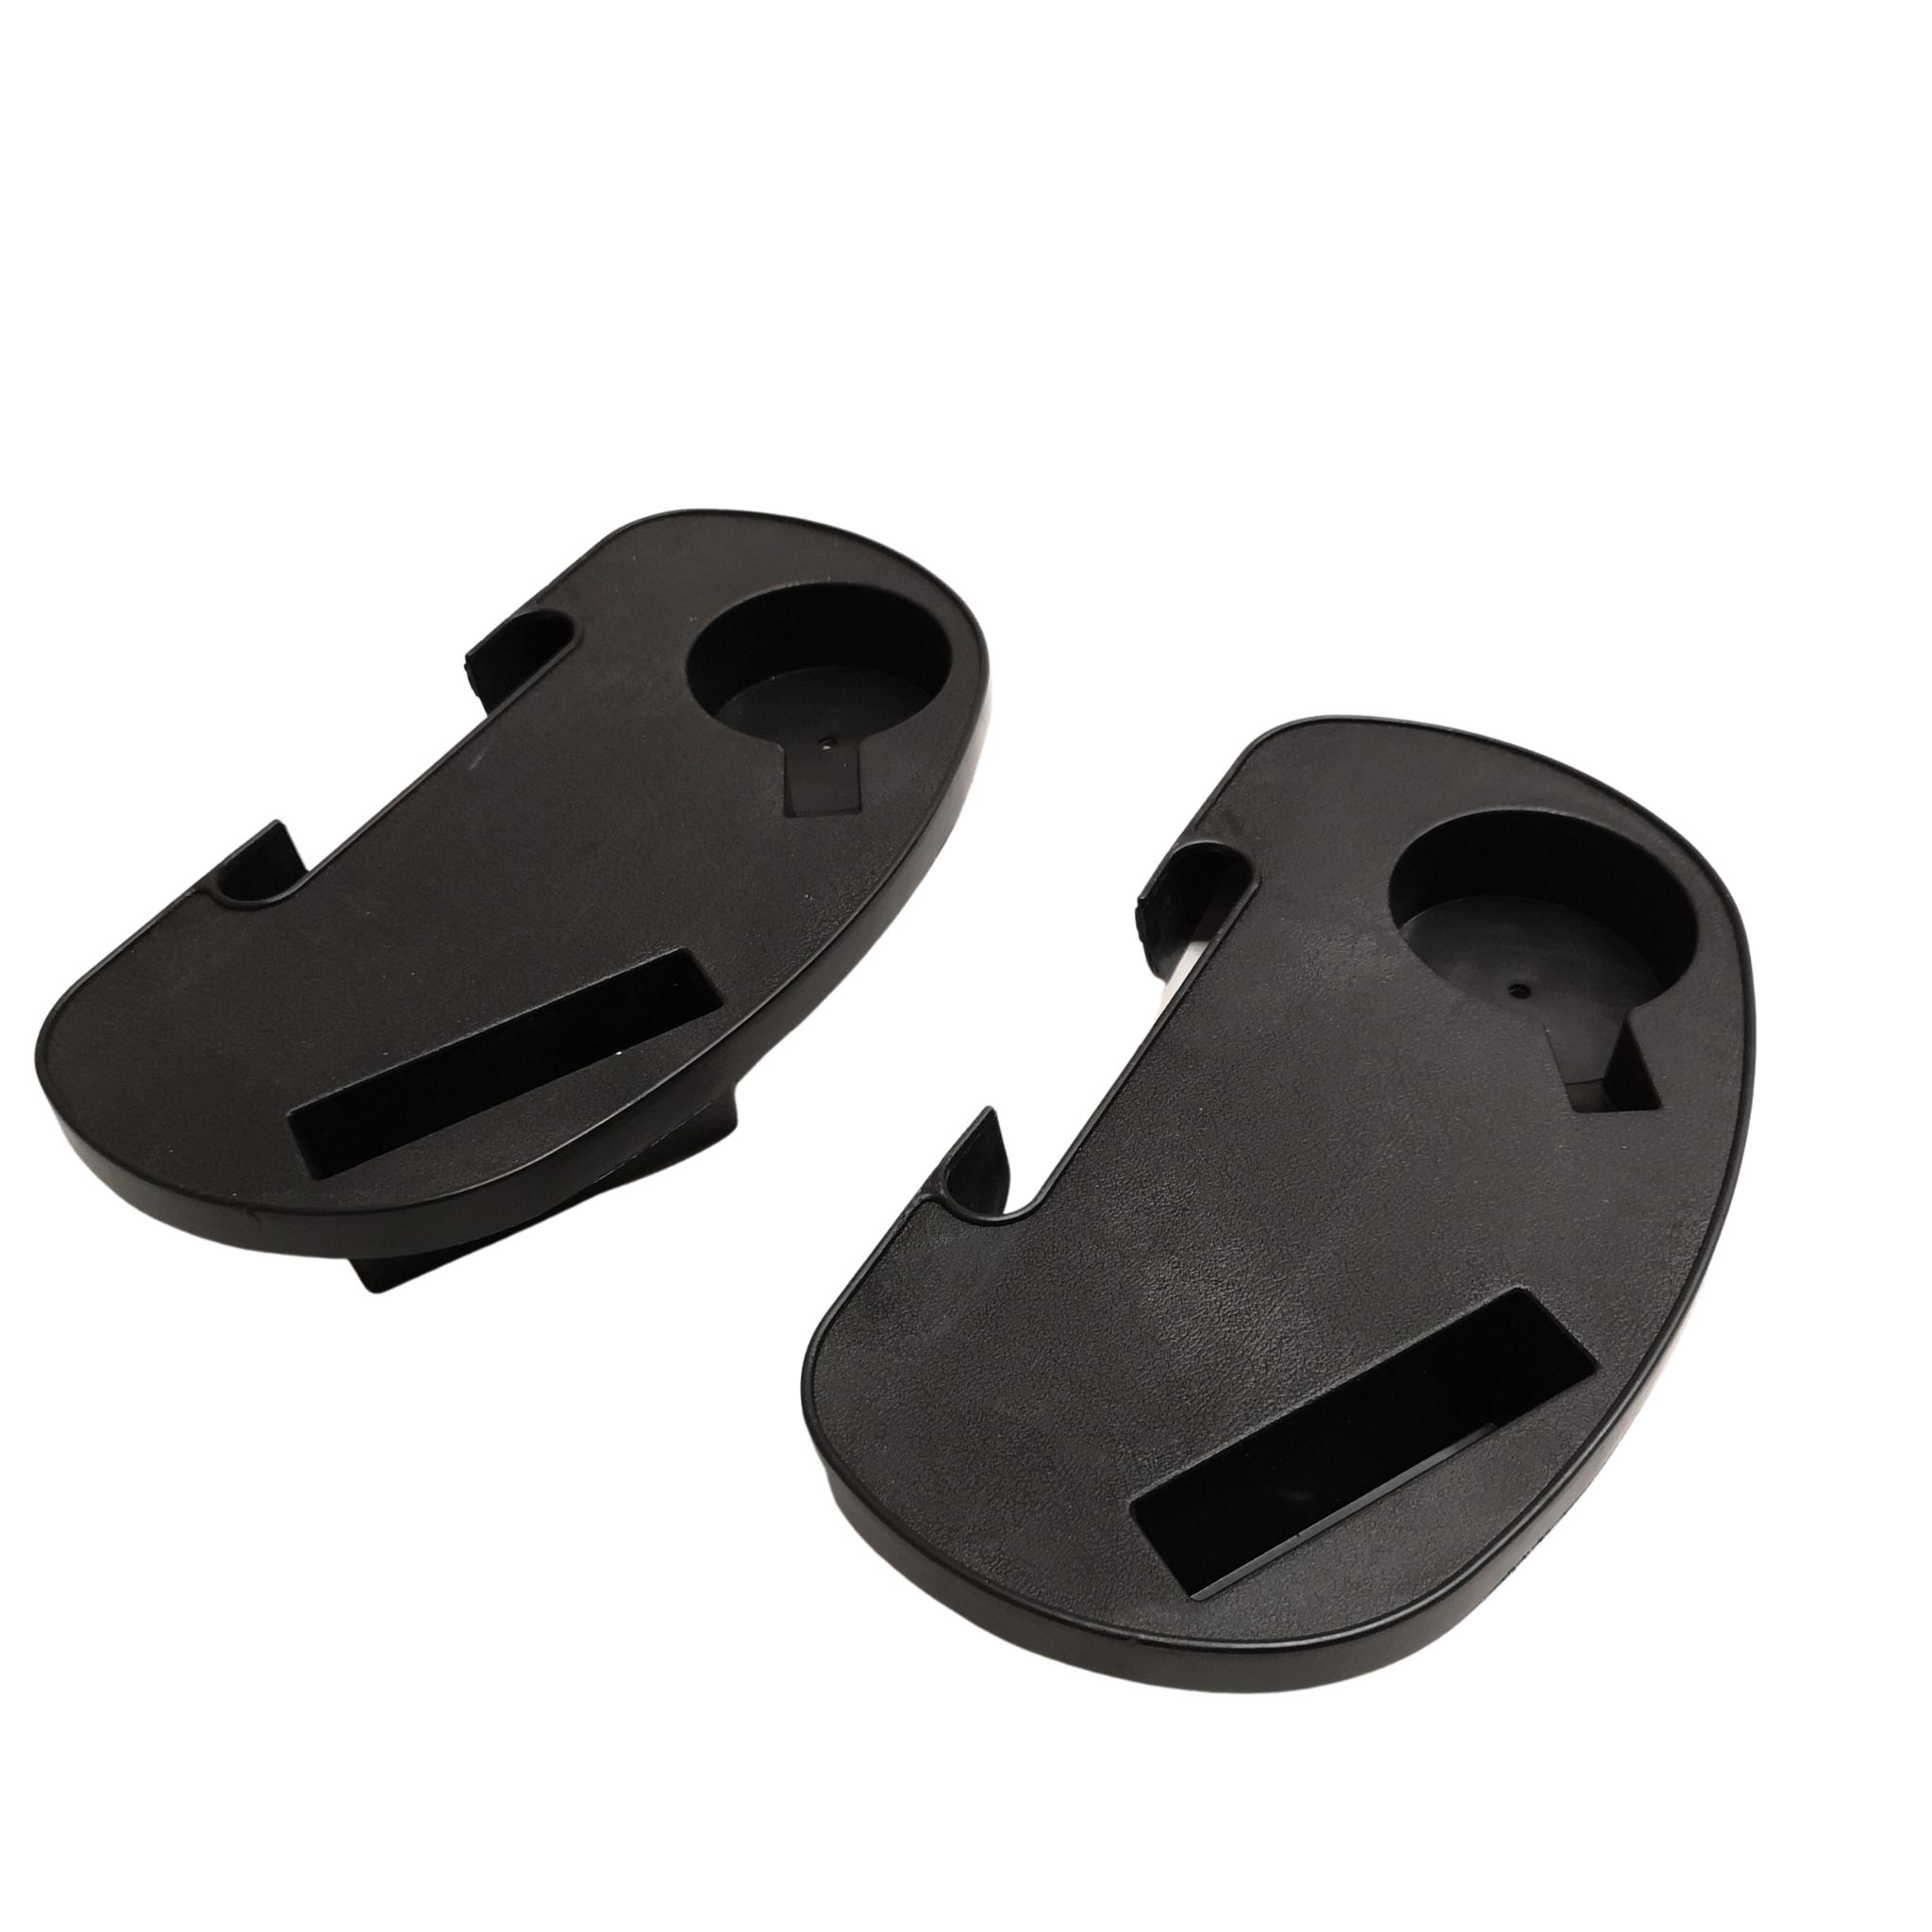 Set of 2 Black Plastic Cupholder Side Tray for Garden Gravity Chairs